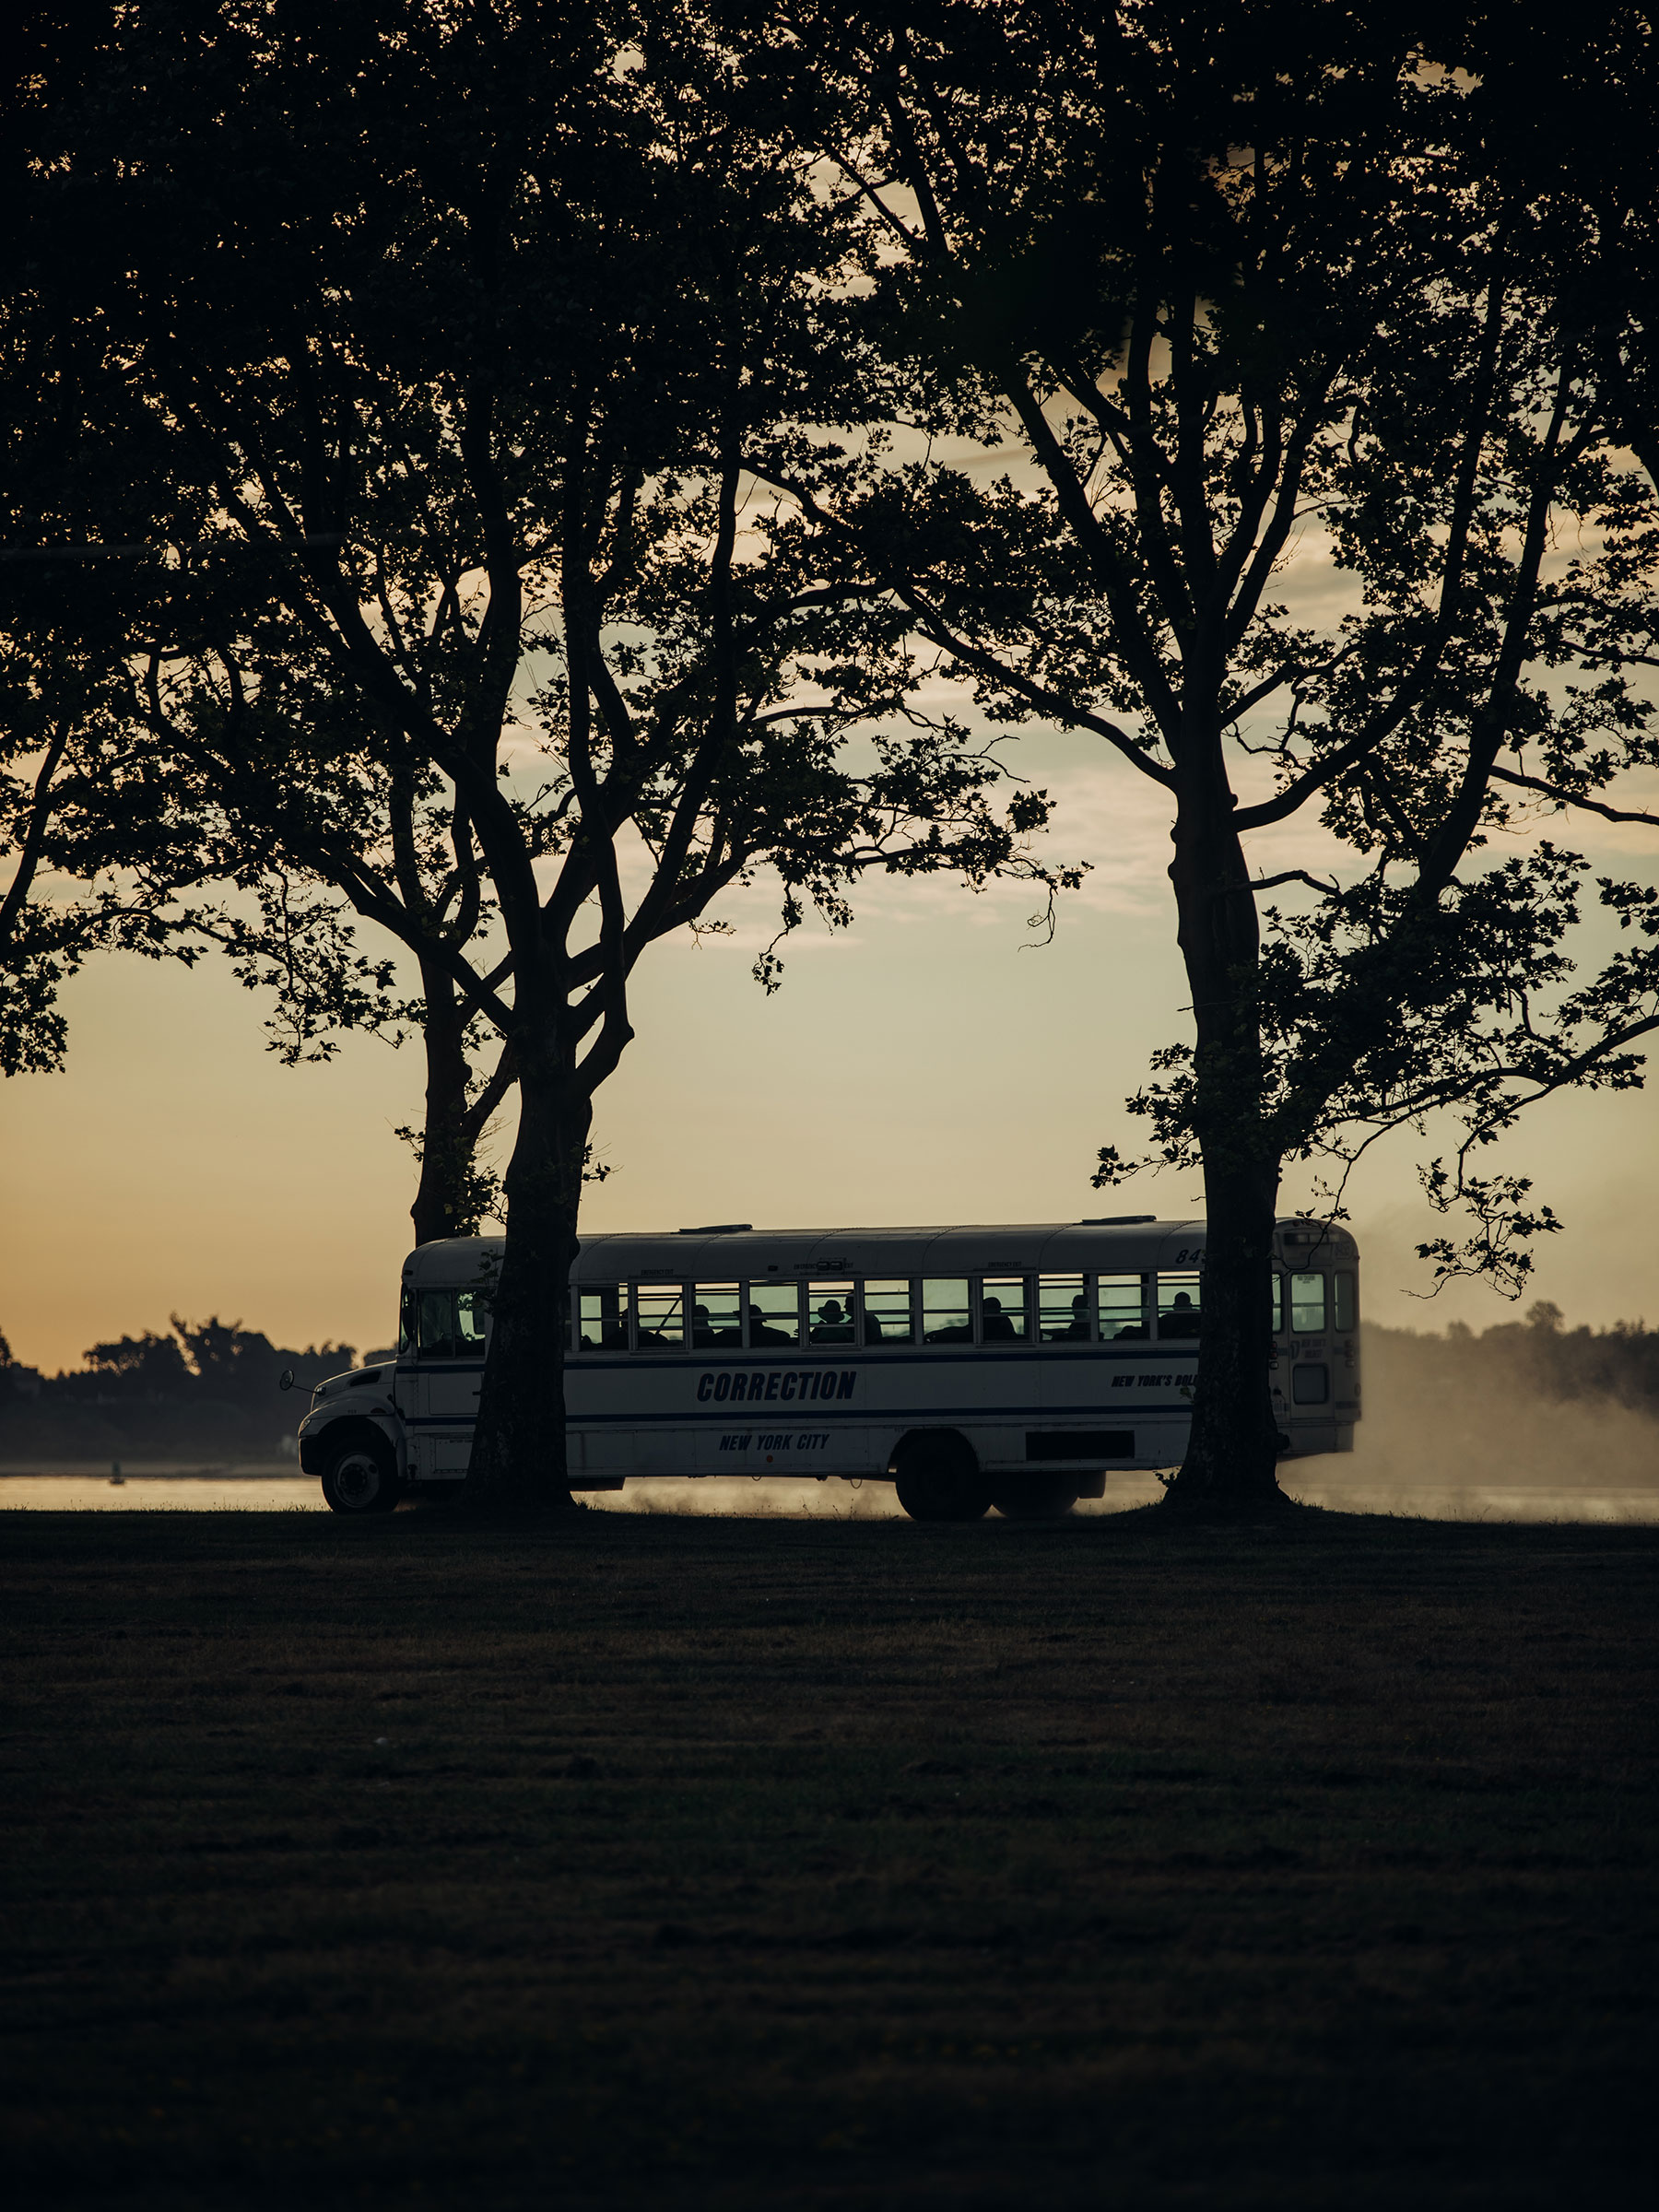 A Department of Correction bus carries workers along Hart Island’s gravel roads. (Sasha Arutyunova for TIME)